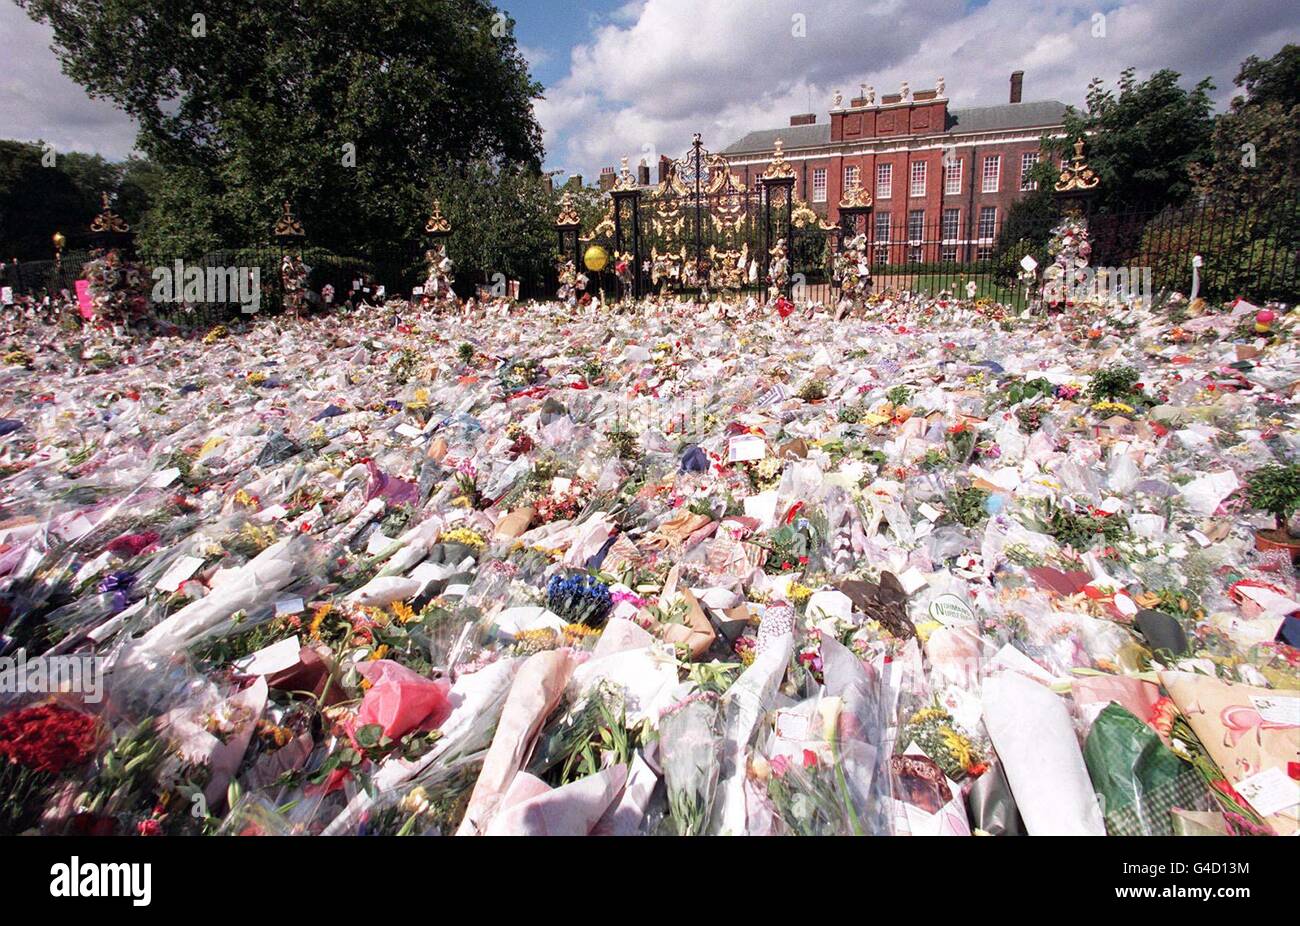 File picture dated 2.9.97 of the sea of flowers outside the gates of Kensington Palace where thousands of mourners from across Britain and the world payed their last respects to Diana, Princess of Wales. The committee set up to decide on ways to mark the life of Diana, Pricess of Wales today (Wednesday) backed a memorial garden at Kensington Palace. Other key proposals are for a 5 pound coin and nursing teams for children. Stock Photo